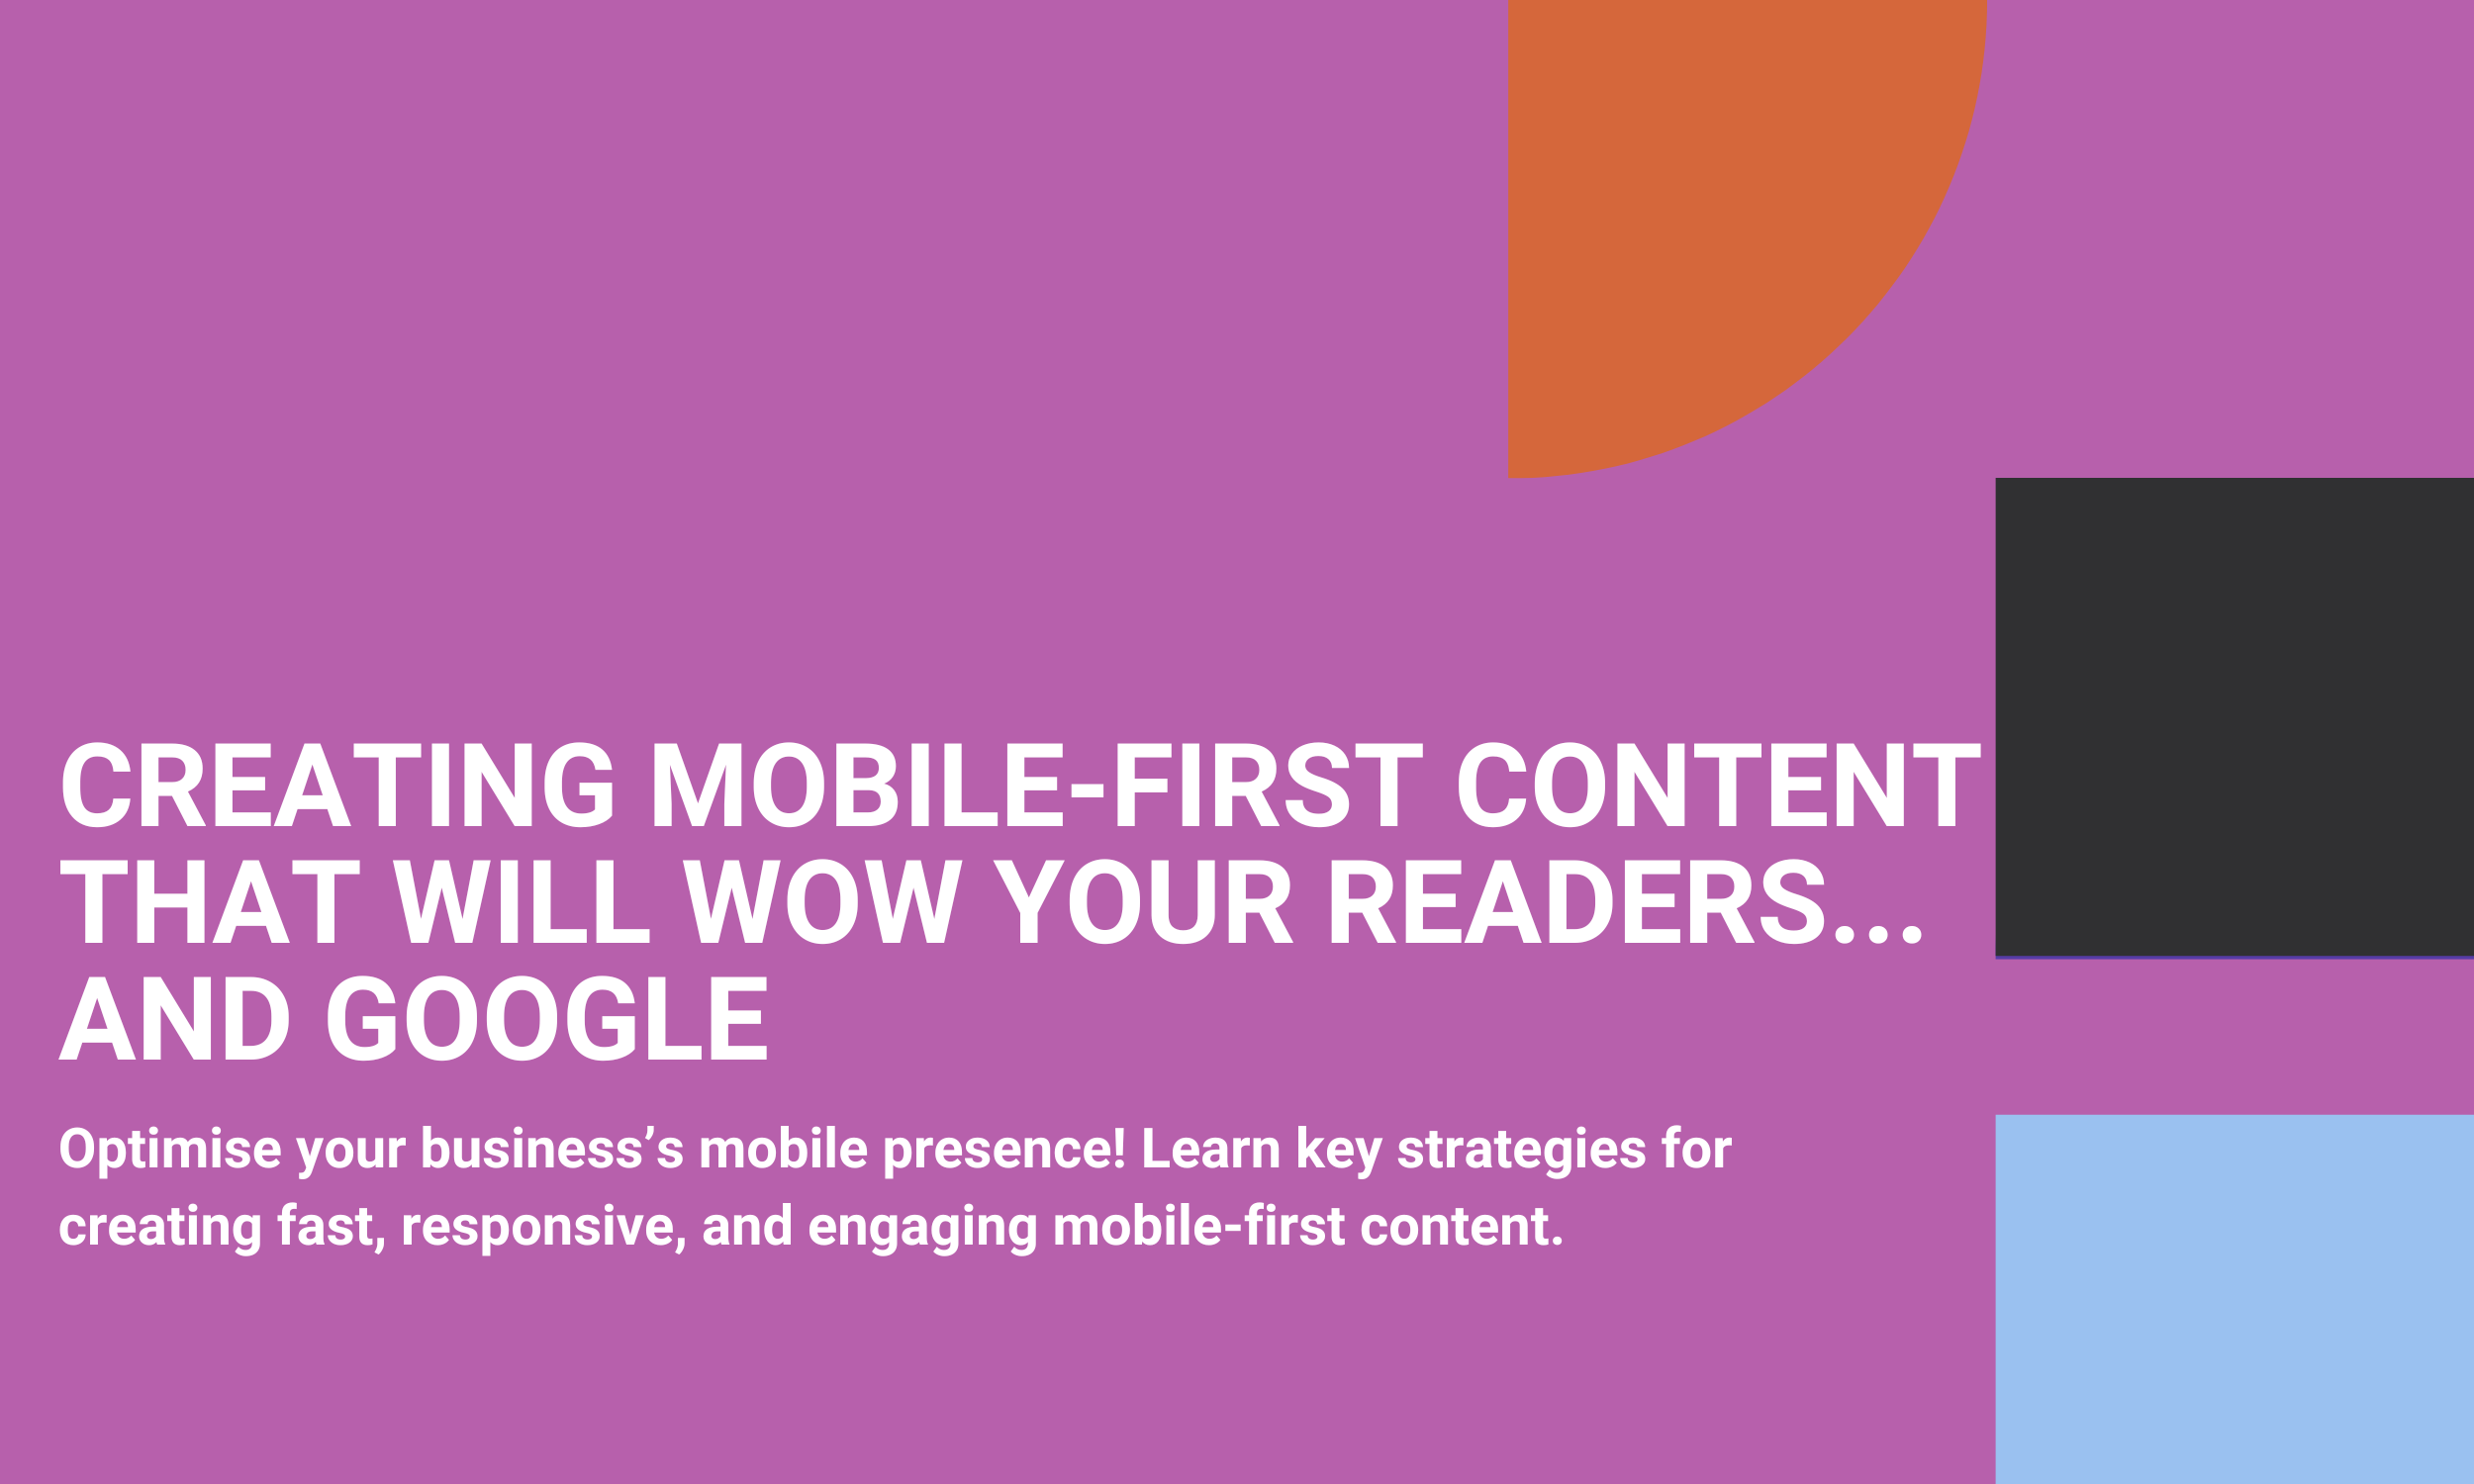 Creating Mobile-First Content That Will Wow Your Readers... and Google